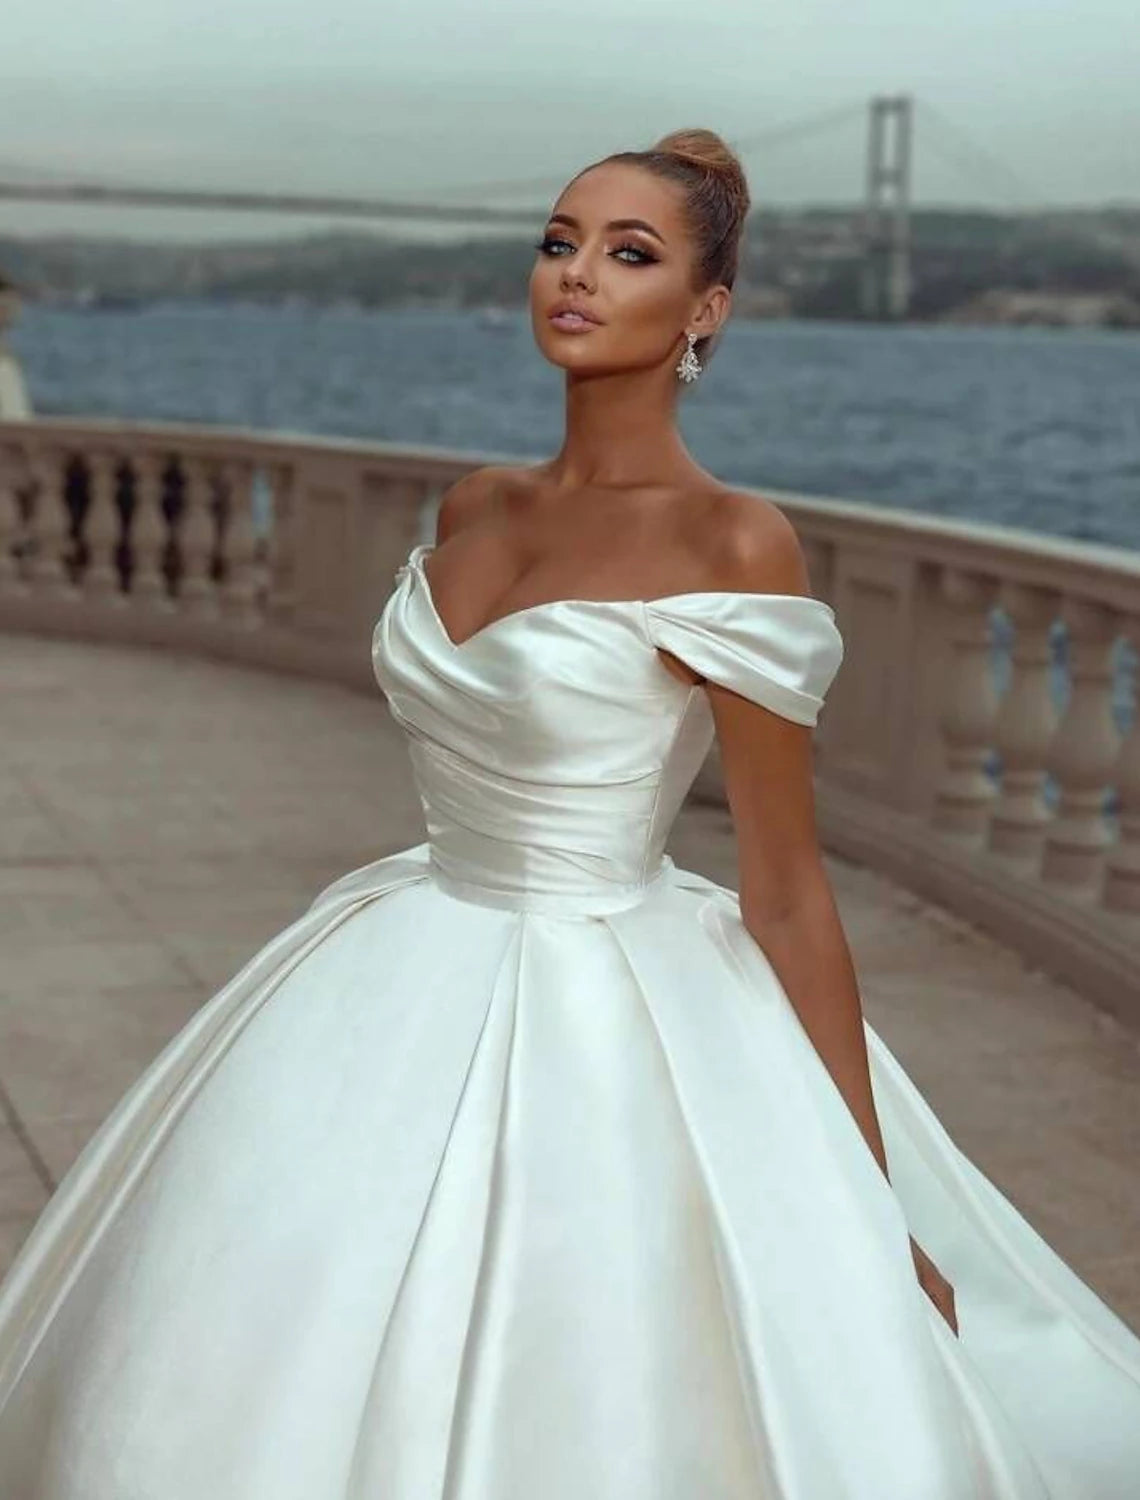 Engagement Formal Wedding Dresses Ball Gown Off Shoulder Cap Sleeve Court Train Satin Bridal Gowns With Ruched Solid Color